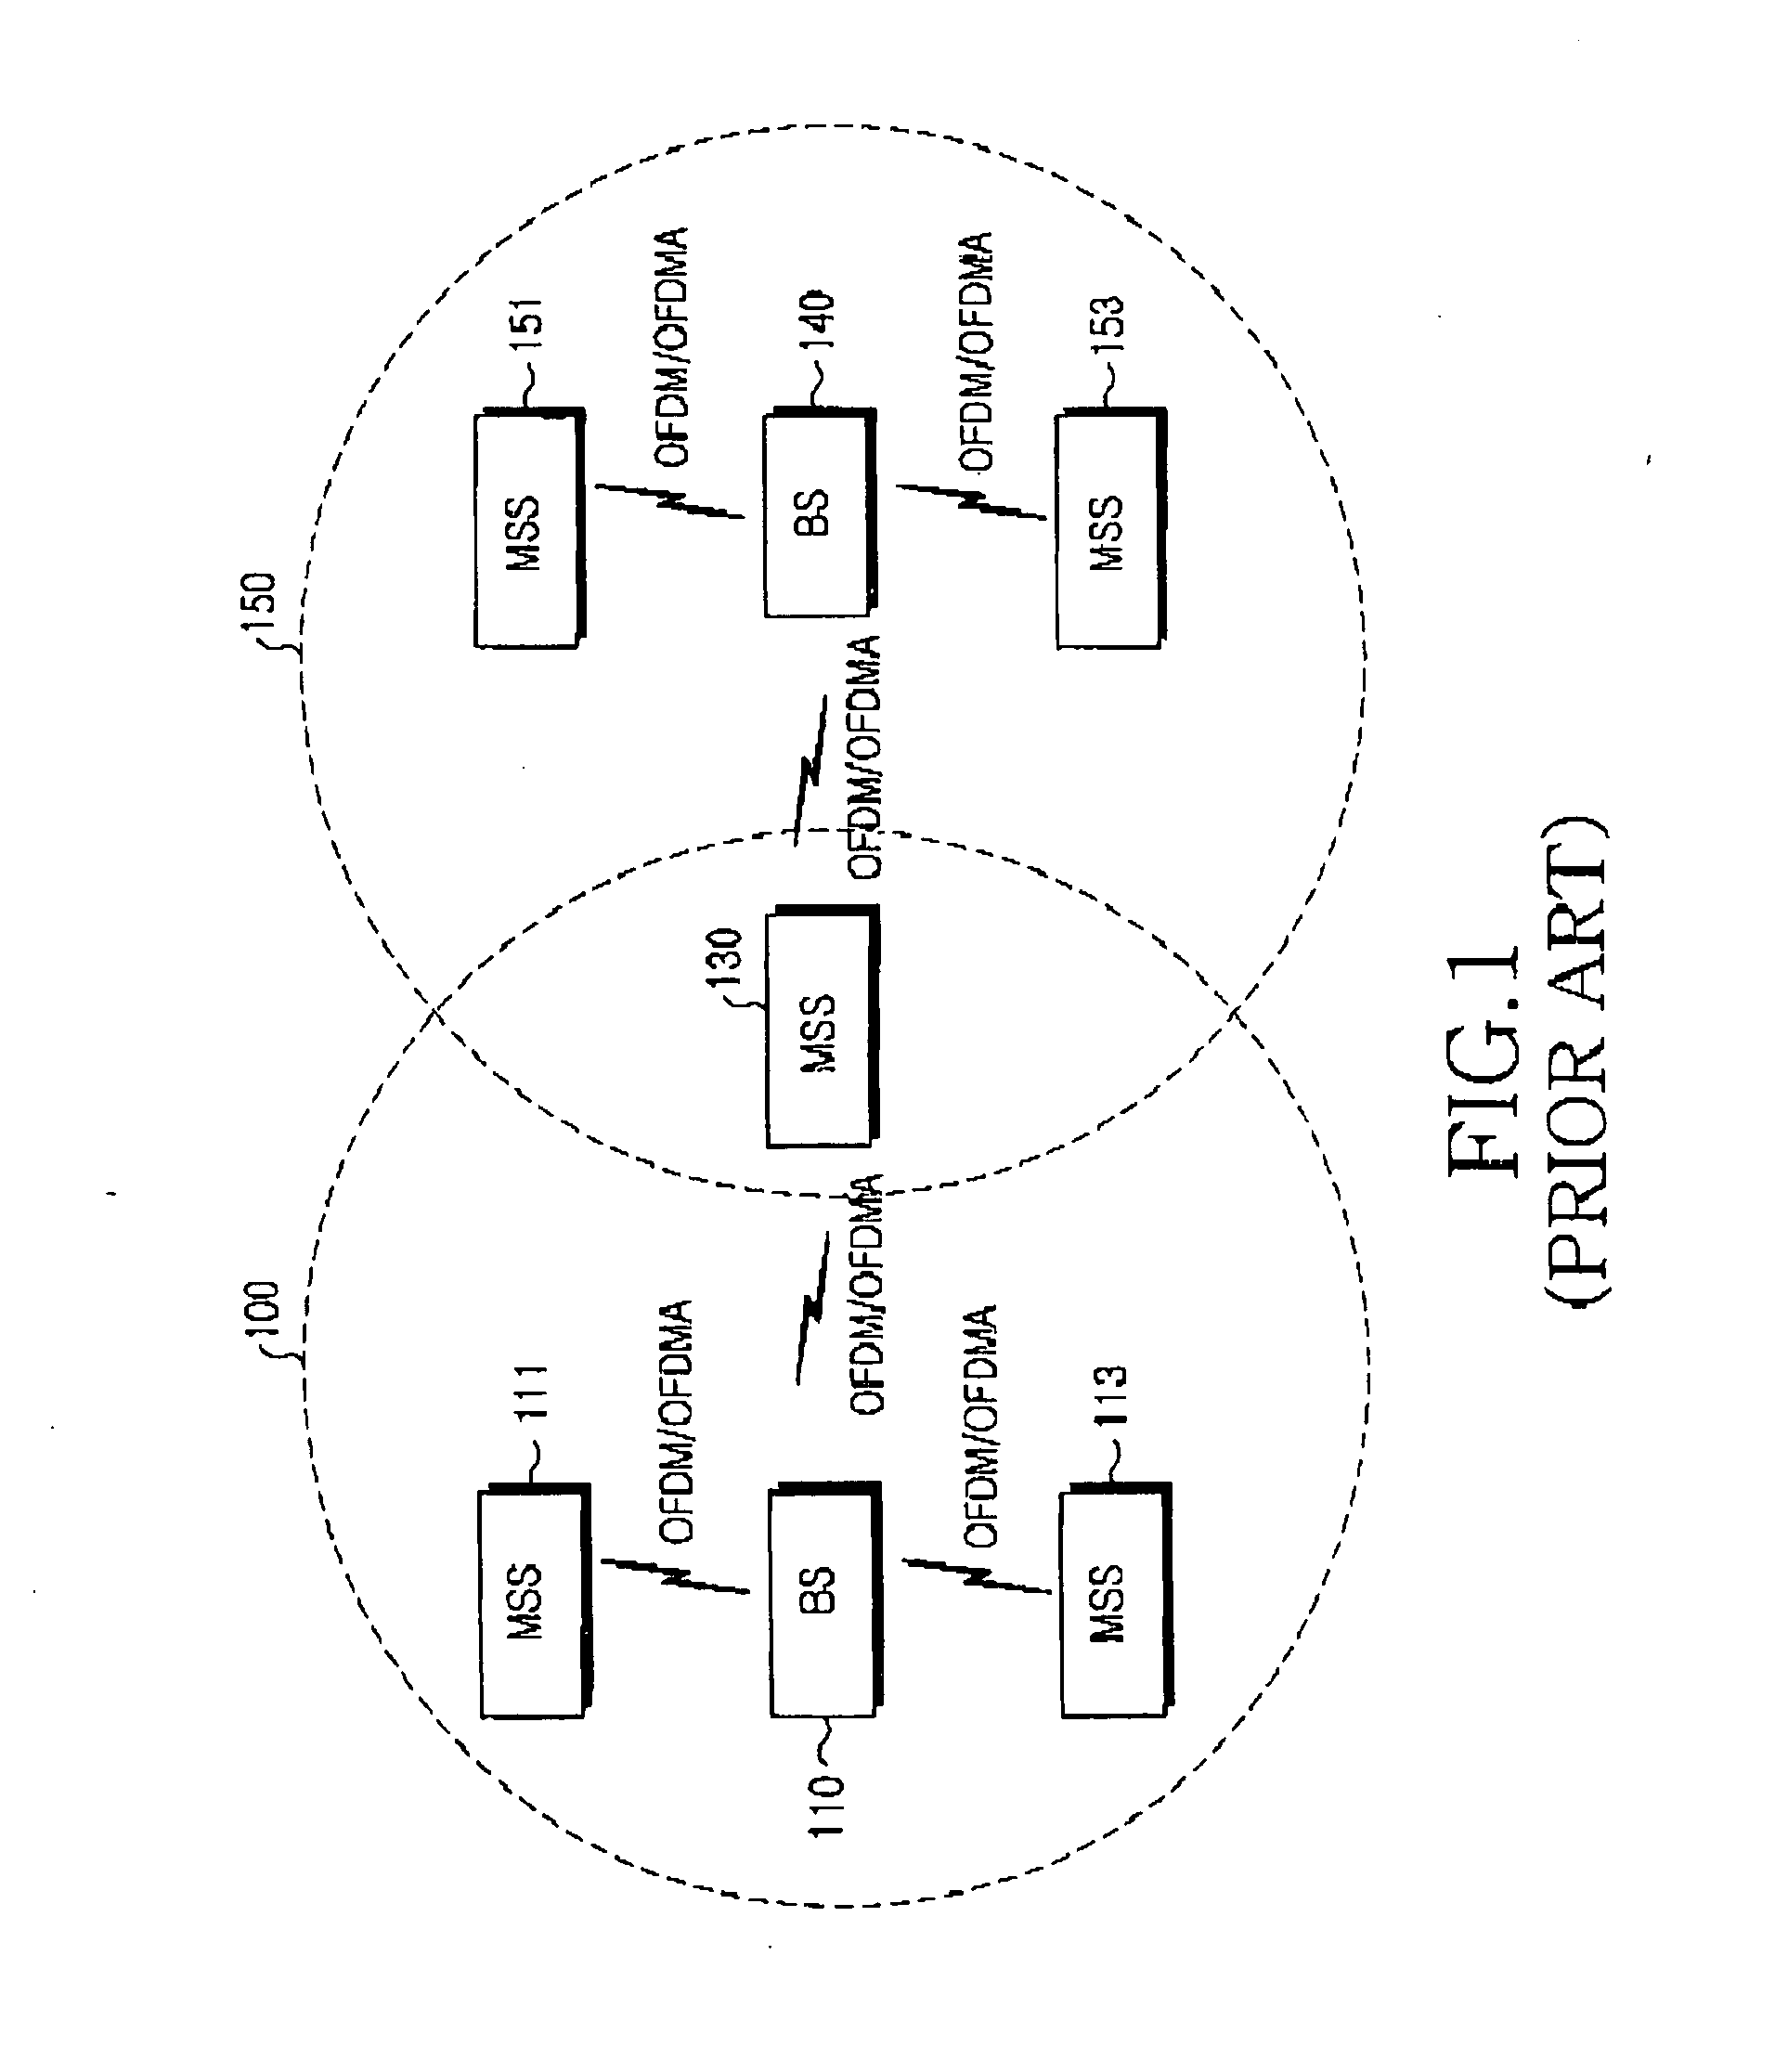 System and method for controlling operation states of a medium access control layer in a broadband wireless access communication system